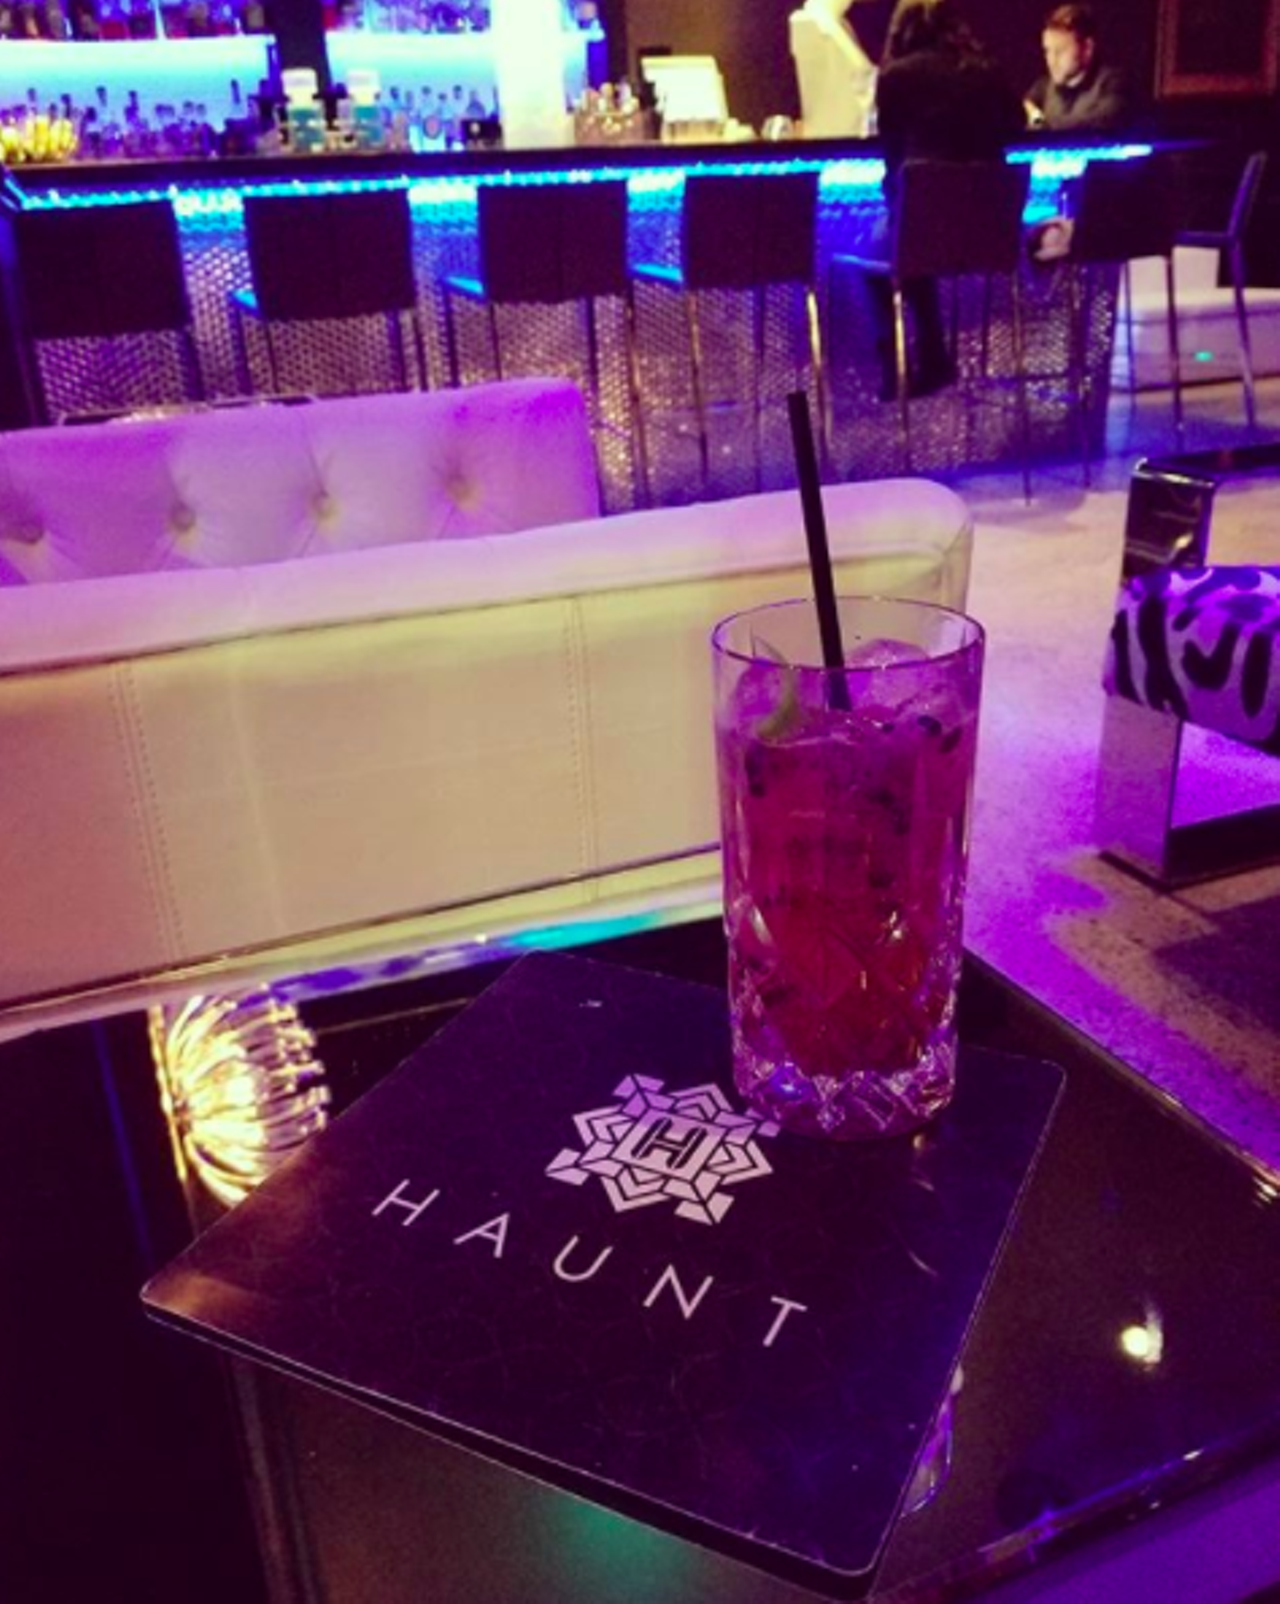 Haunt Lounge at The St. Anthony Hotel
300 E. Travis, (210) 227-4392
Don’t let the name fool you, this hotel bar is all kinds of inviting. With chic furniture and delicious cocktails, Haunt Lounge will have you playing tourist all winter – and probably all year too.
Photo via Instagram / bonita1979